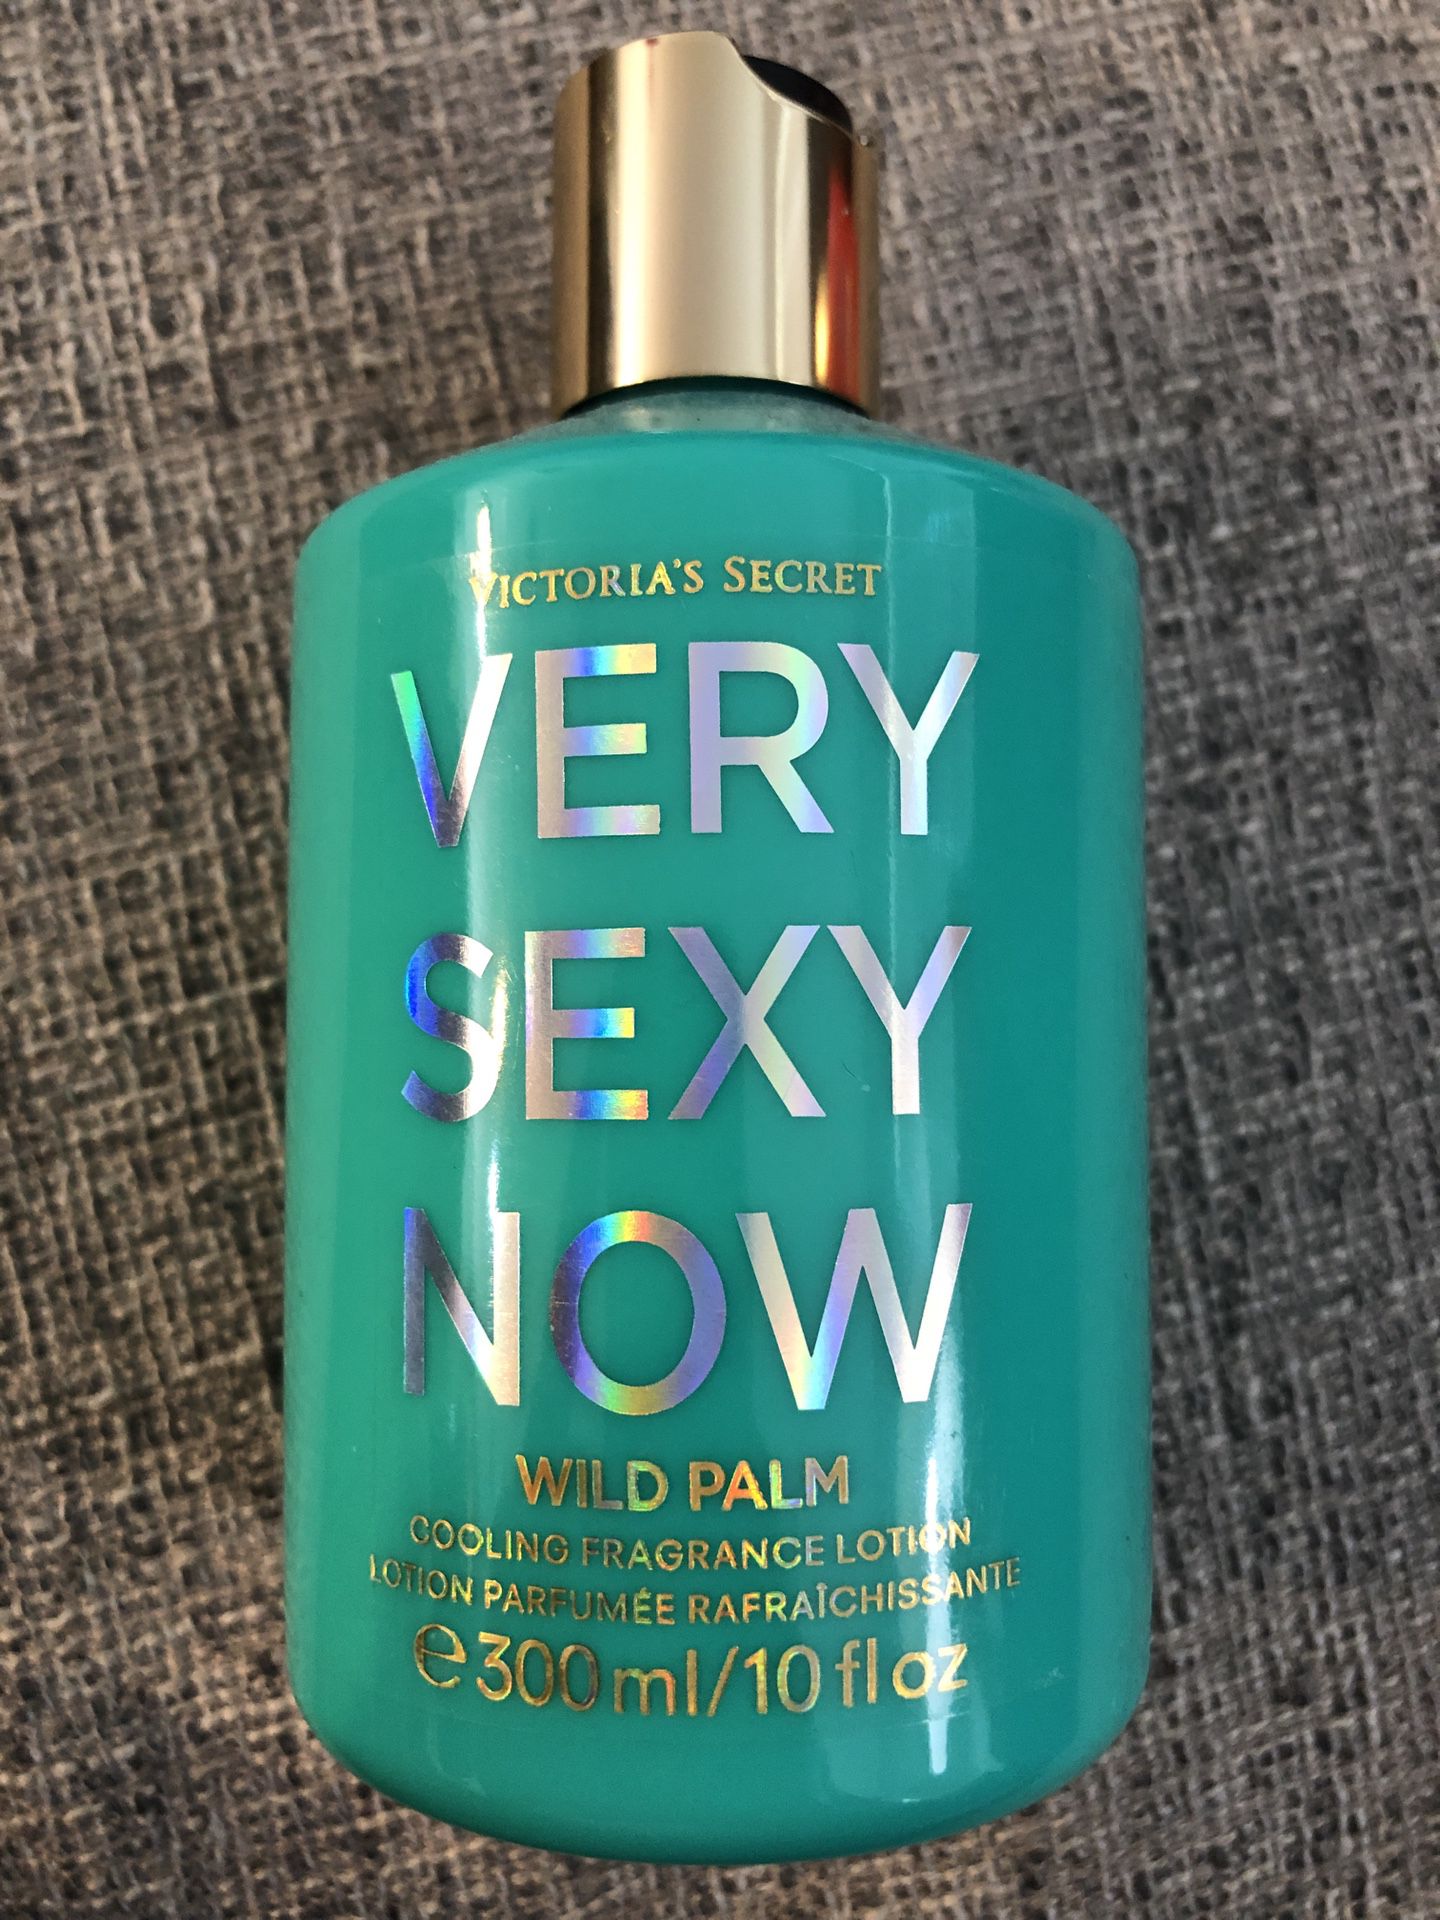 Brand New Victoria’s Secret Very Sexy Now Wild Palm Cooling Fragrance Lotion